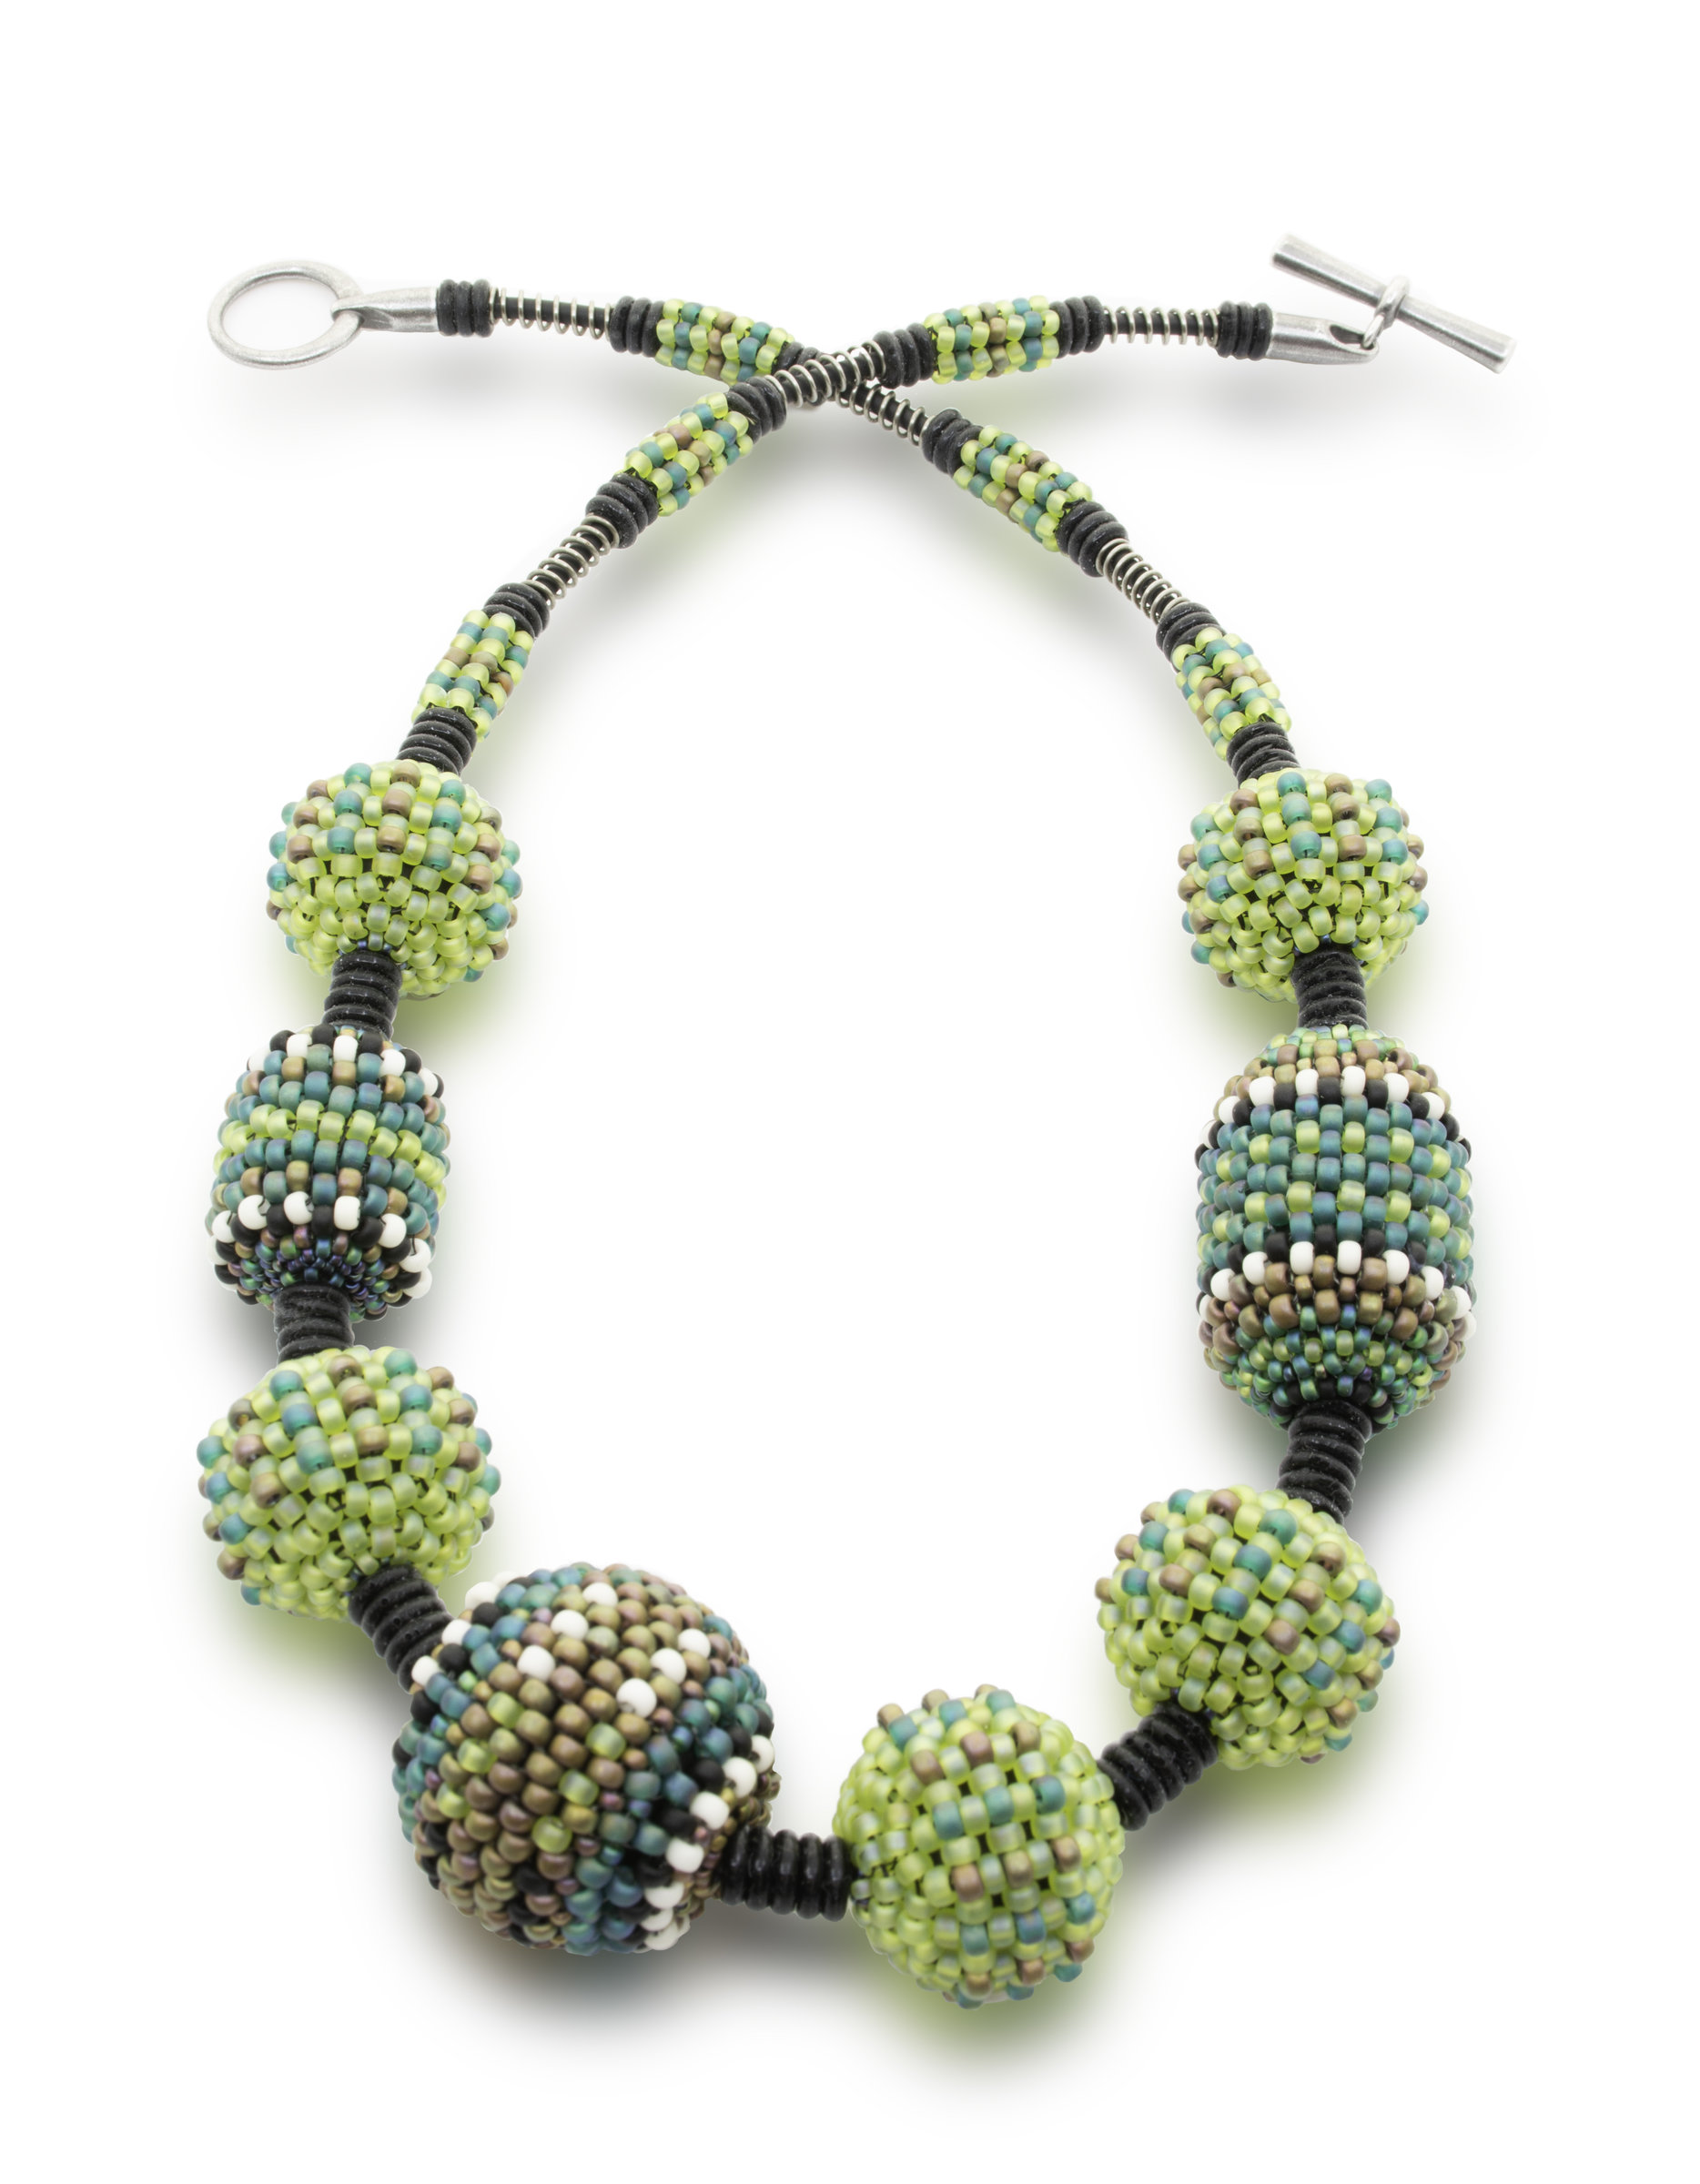 Cosmos Necklace by Sheila Fernekes (Beaded Necklace) | Artful Home